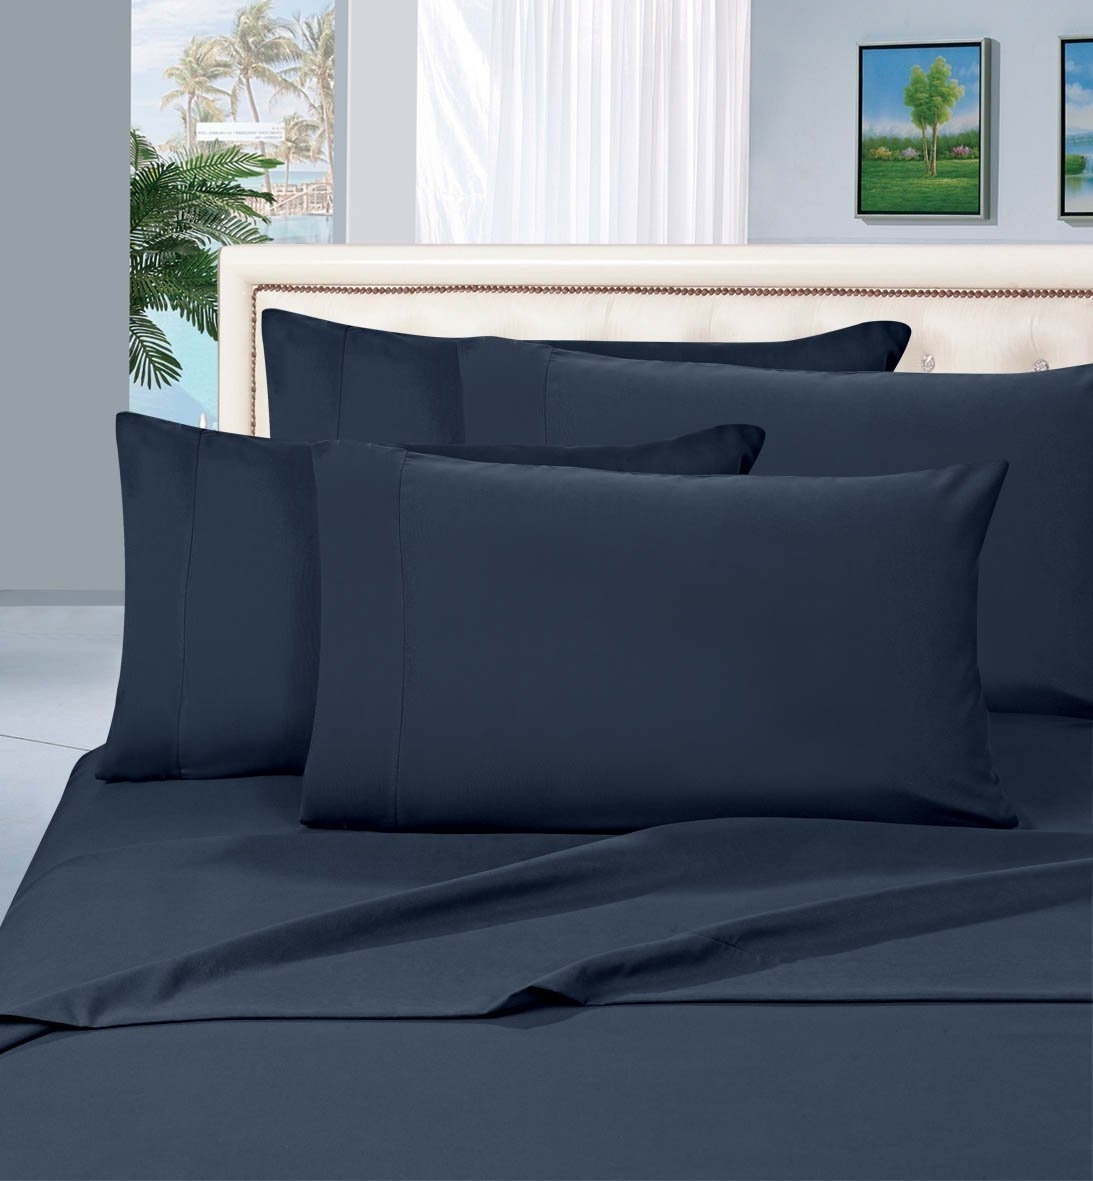 Elegant Comfort 1500 Series Wrinkle Resistant Egyptian Quality Hypoallergenic Ultra Soft Luxury 4-piece Bed Sheet Set, King, Navy Blue